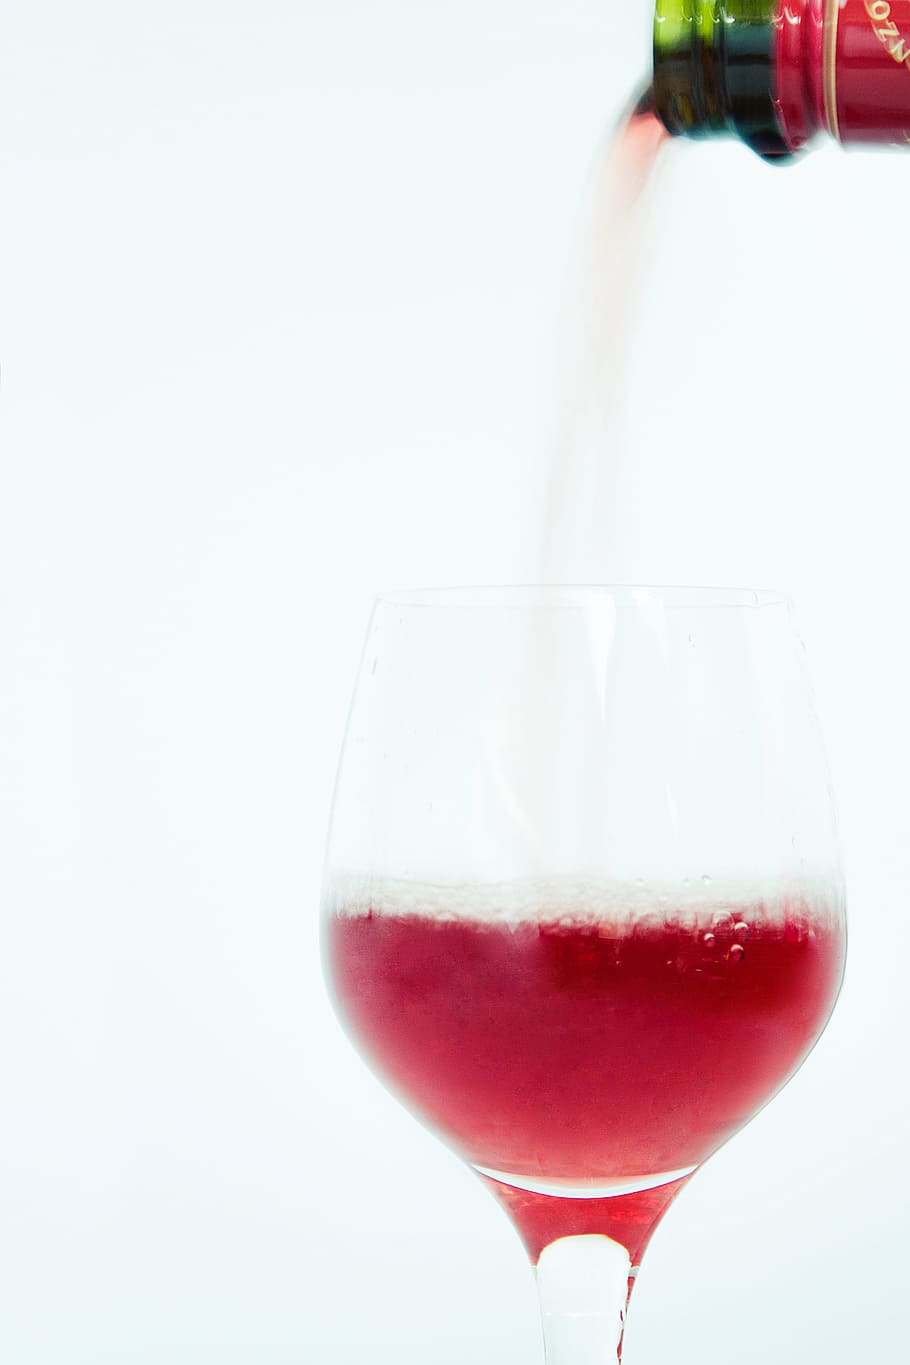 glass, wine, bottle, drink, red wine, refreshment, food and drink, alcohol, studio shot, red